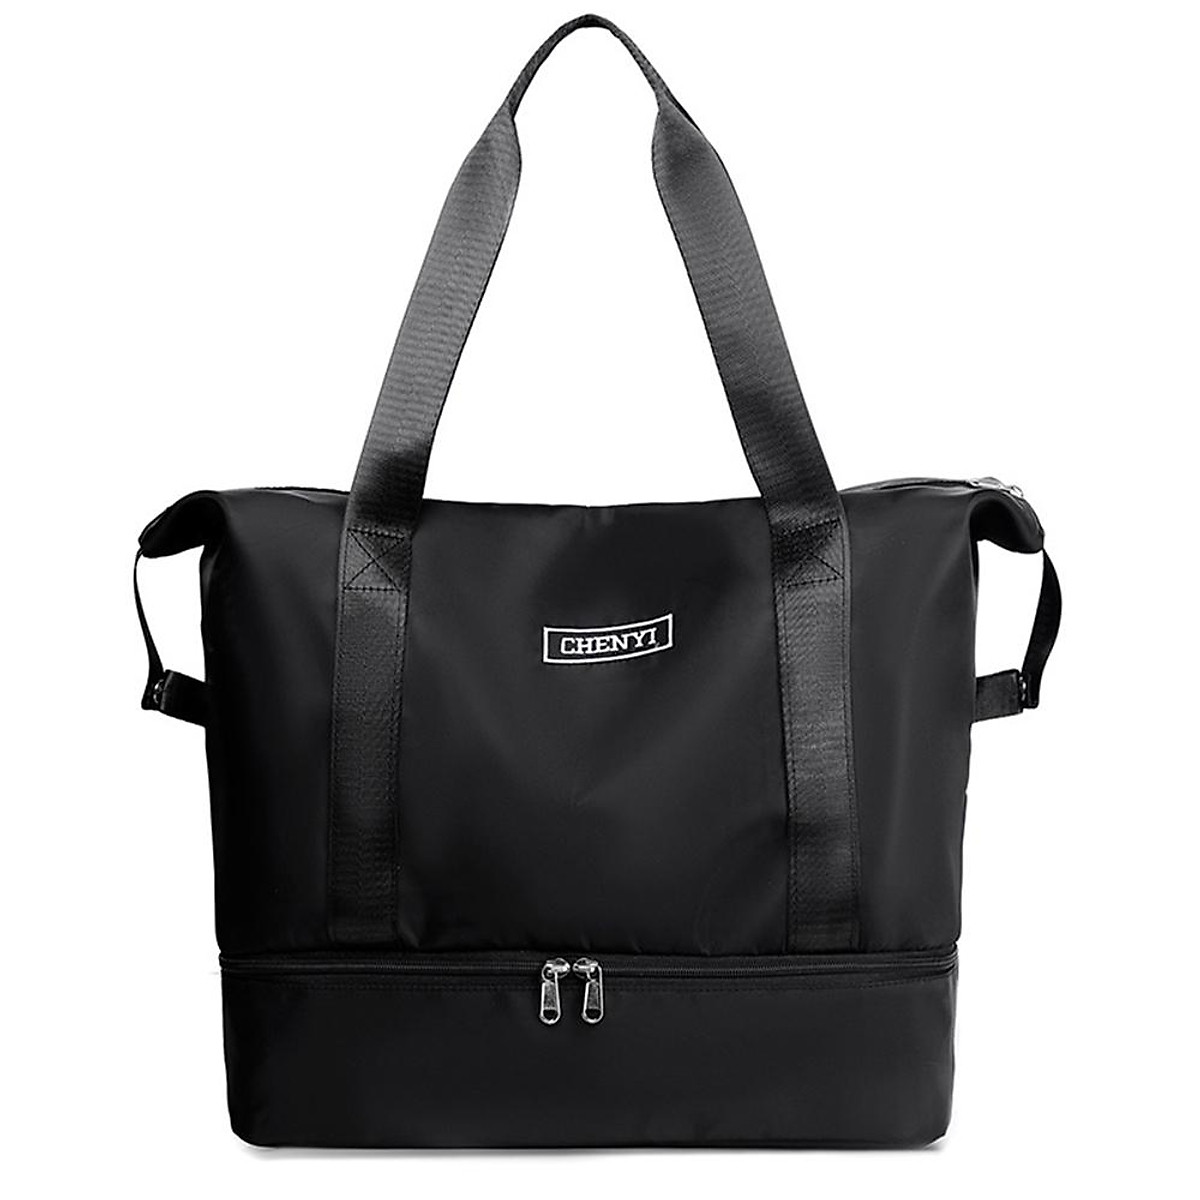 12 Spacious Weekend Bags With Shoe Compartments | HuffPost Life